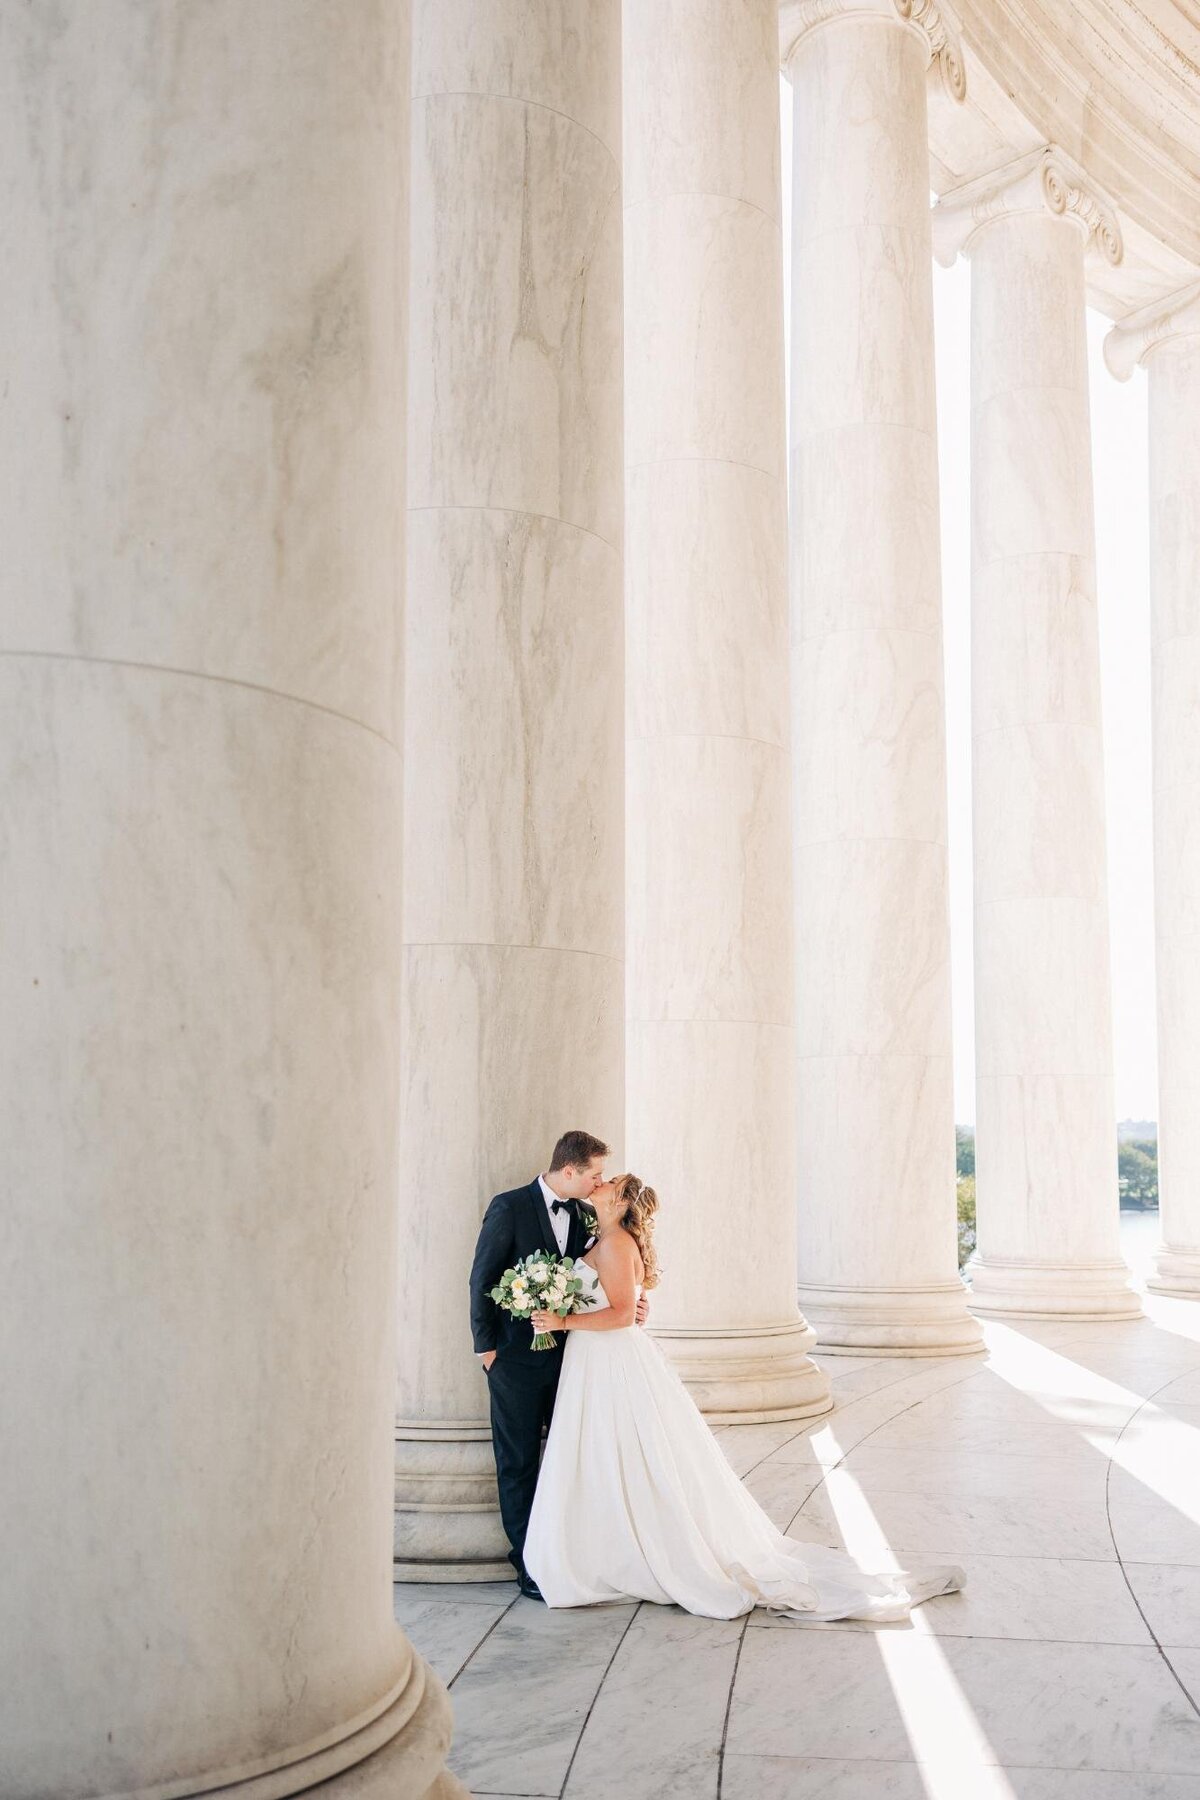 A couple in wedding attire sharing a moment among classical columns.